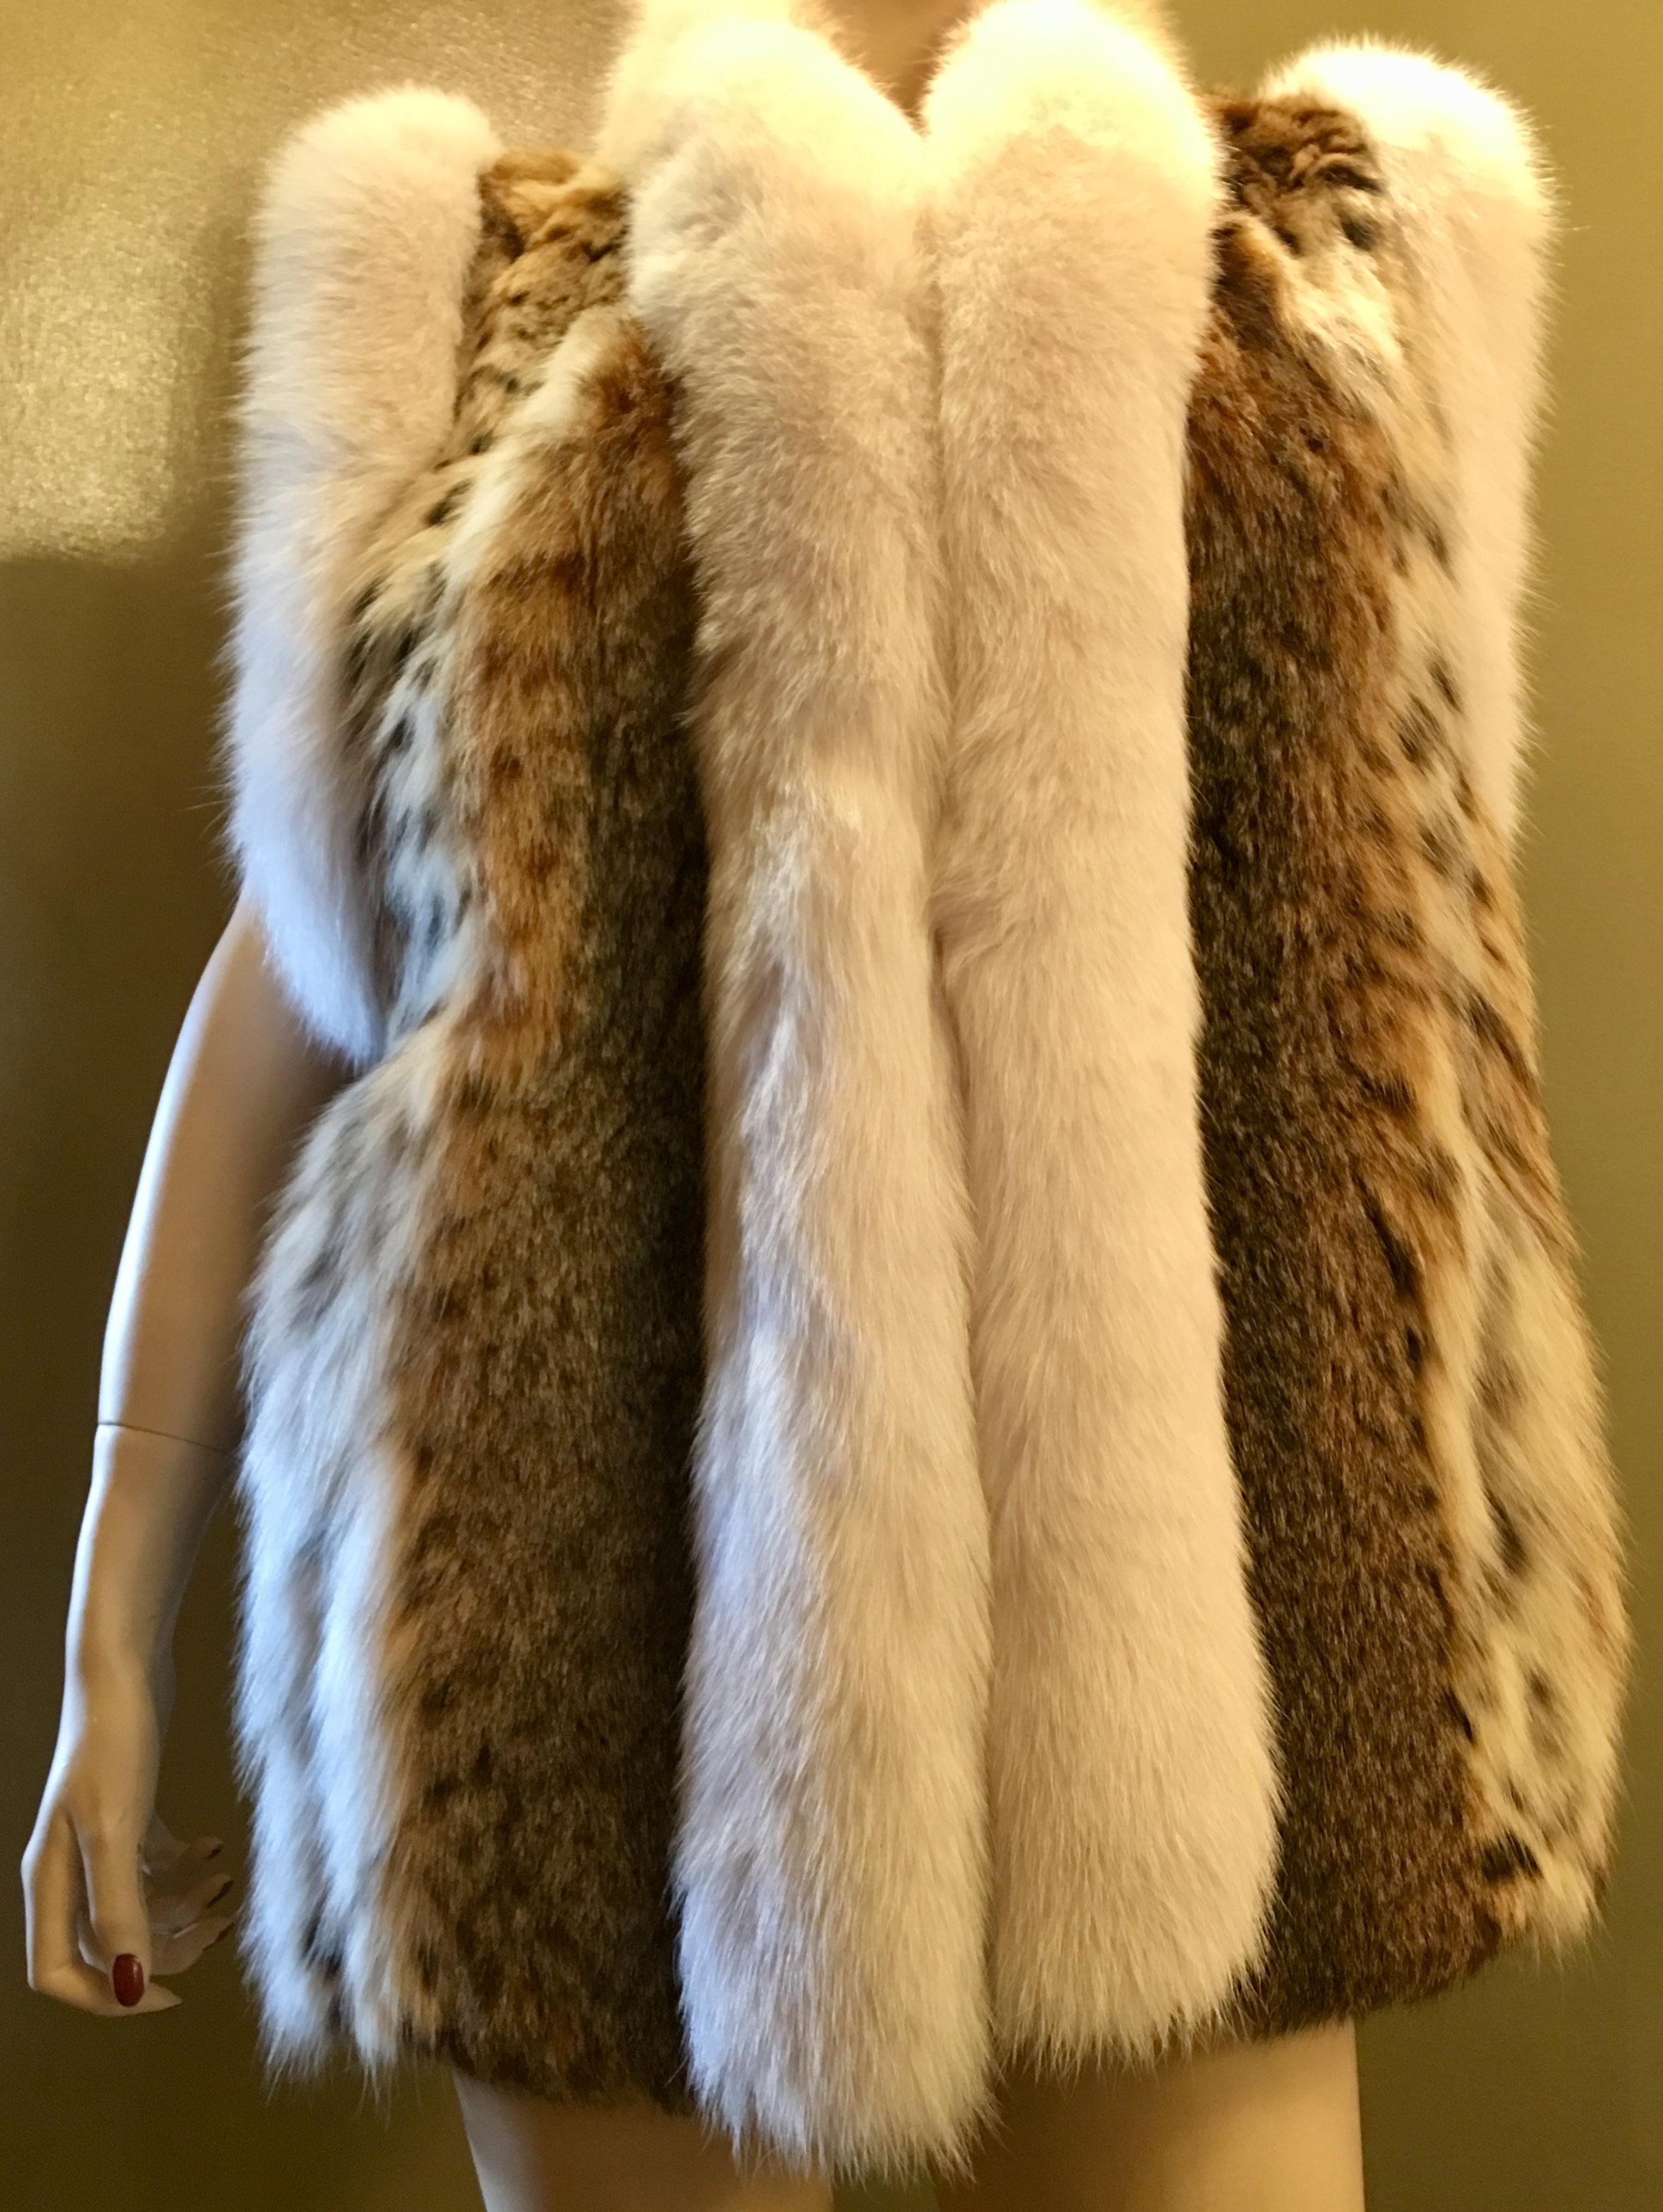 Strikingly marked lynx fur vest with vivid coloration, contrasts with white fox fur trim around the arm openings and the front edges.  The pelts are very soft and silky to the touch.  Features velvet-lined slash pockets and a satiny, taupe colored